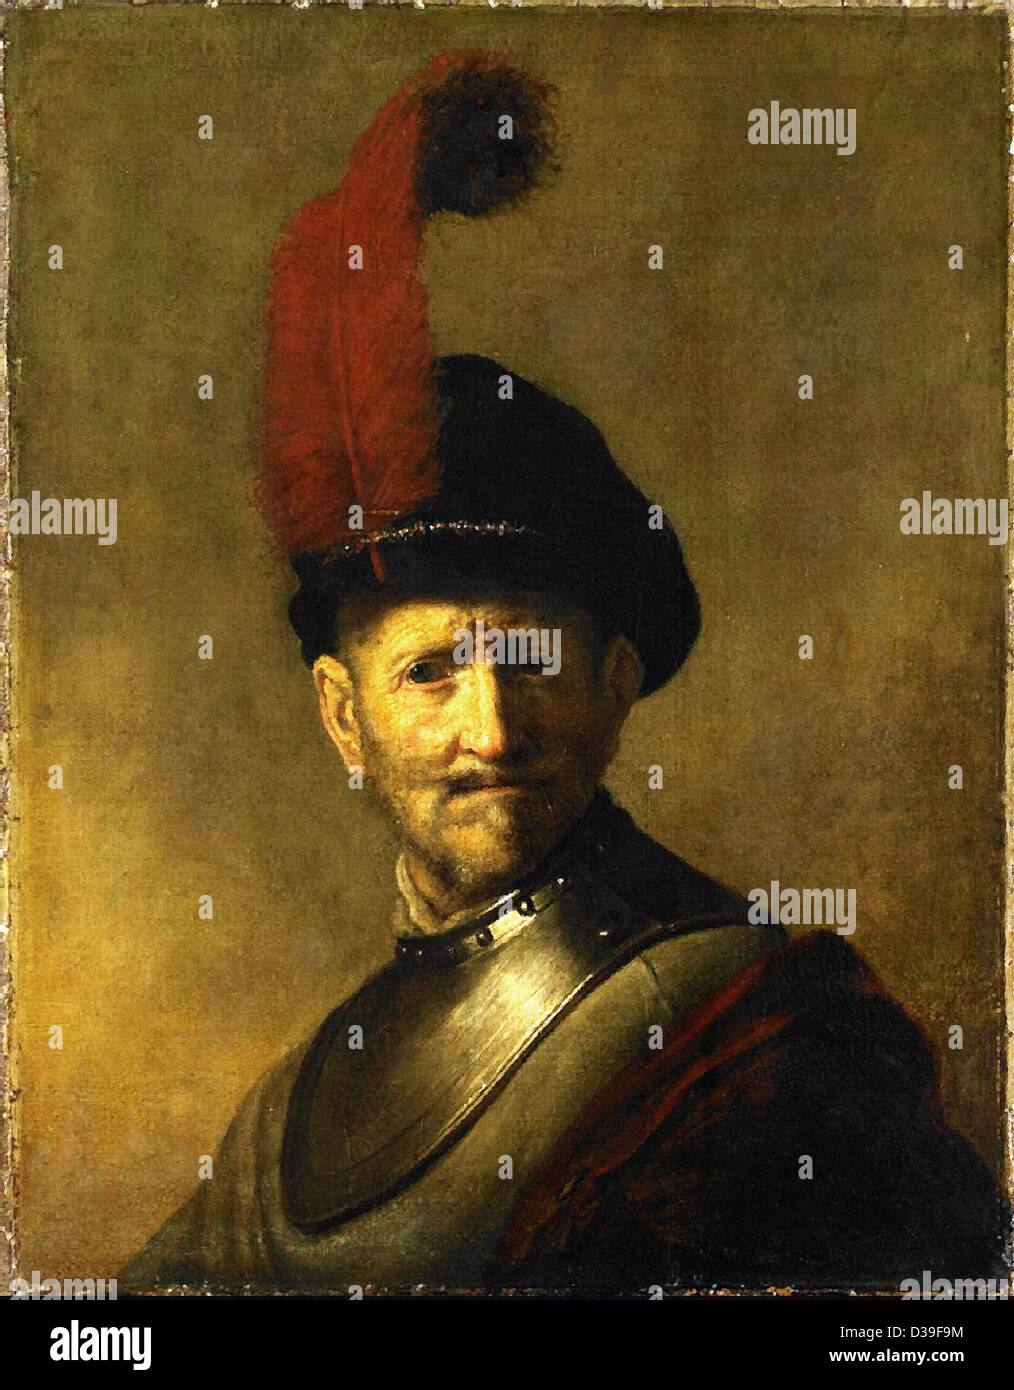 Rembrandt van Rijn, An Old Man in Military Costume (formerly called Portrait of Rembrandt's Father). 1630 Oil on panel. Baroque. Stock Photo